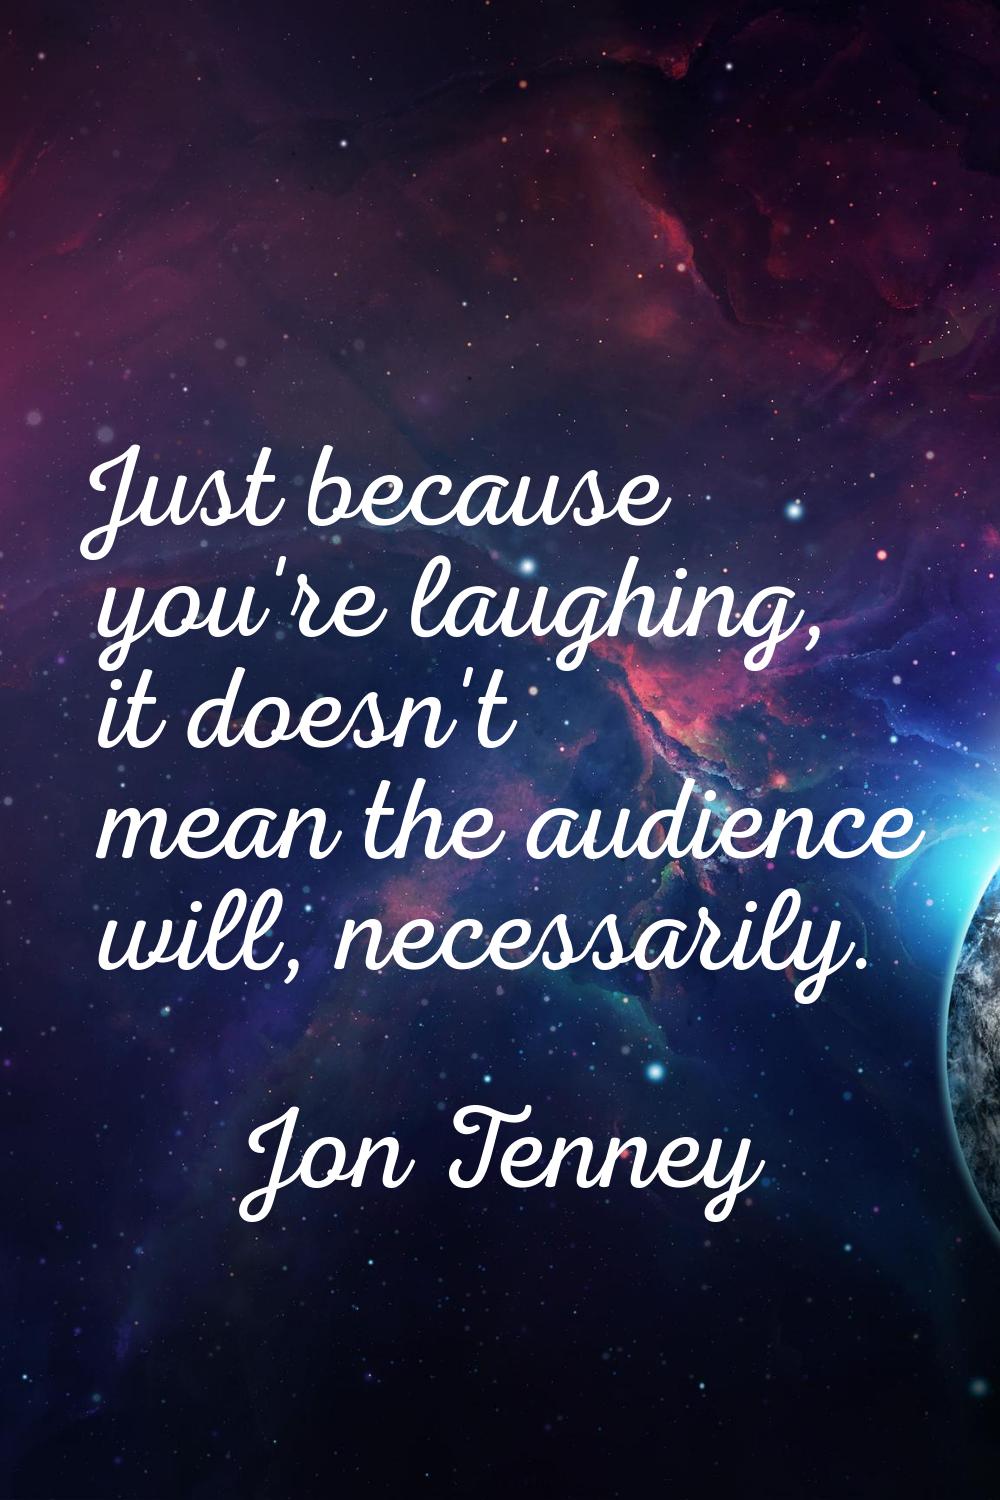 Just because you're laughing, it doesn't mean the audience will, necessarily.